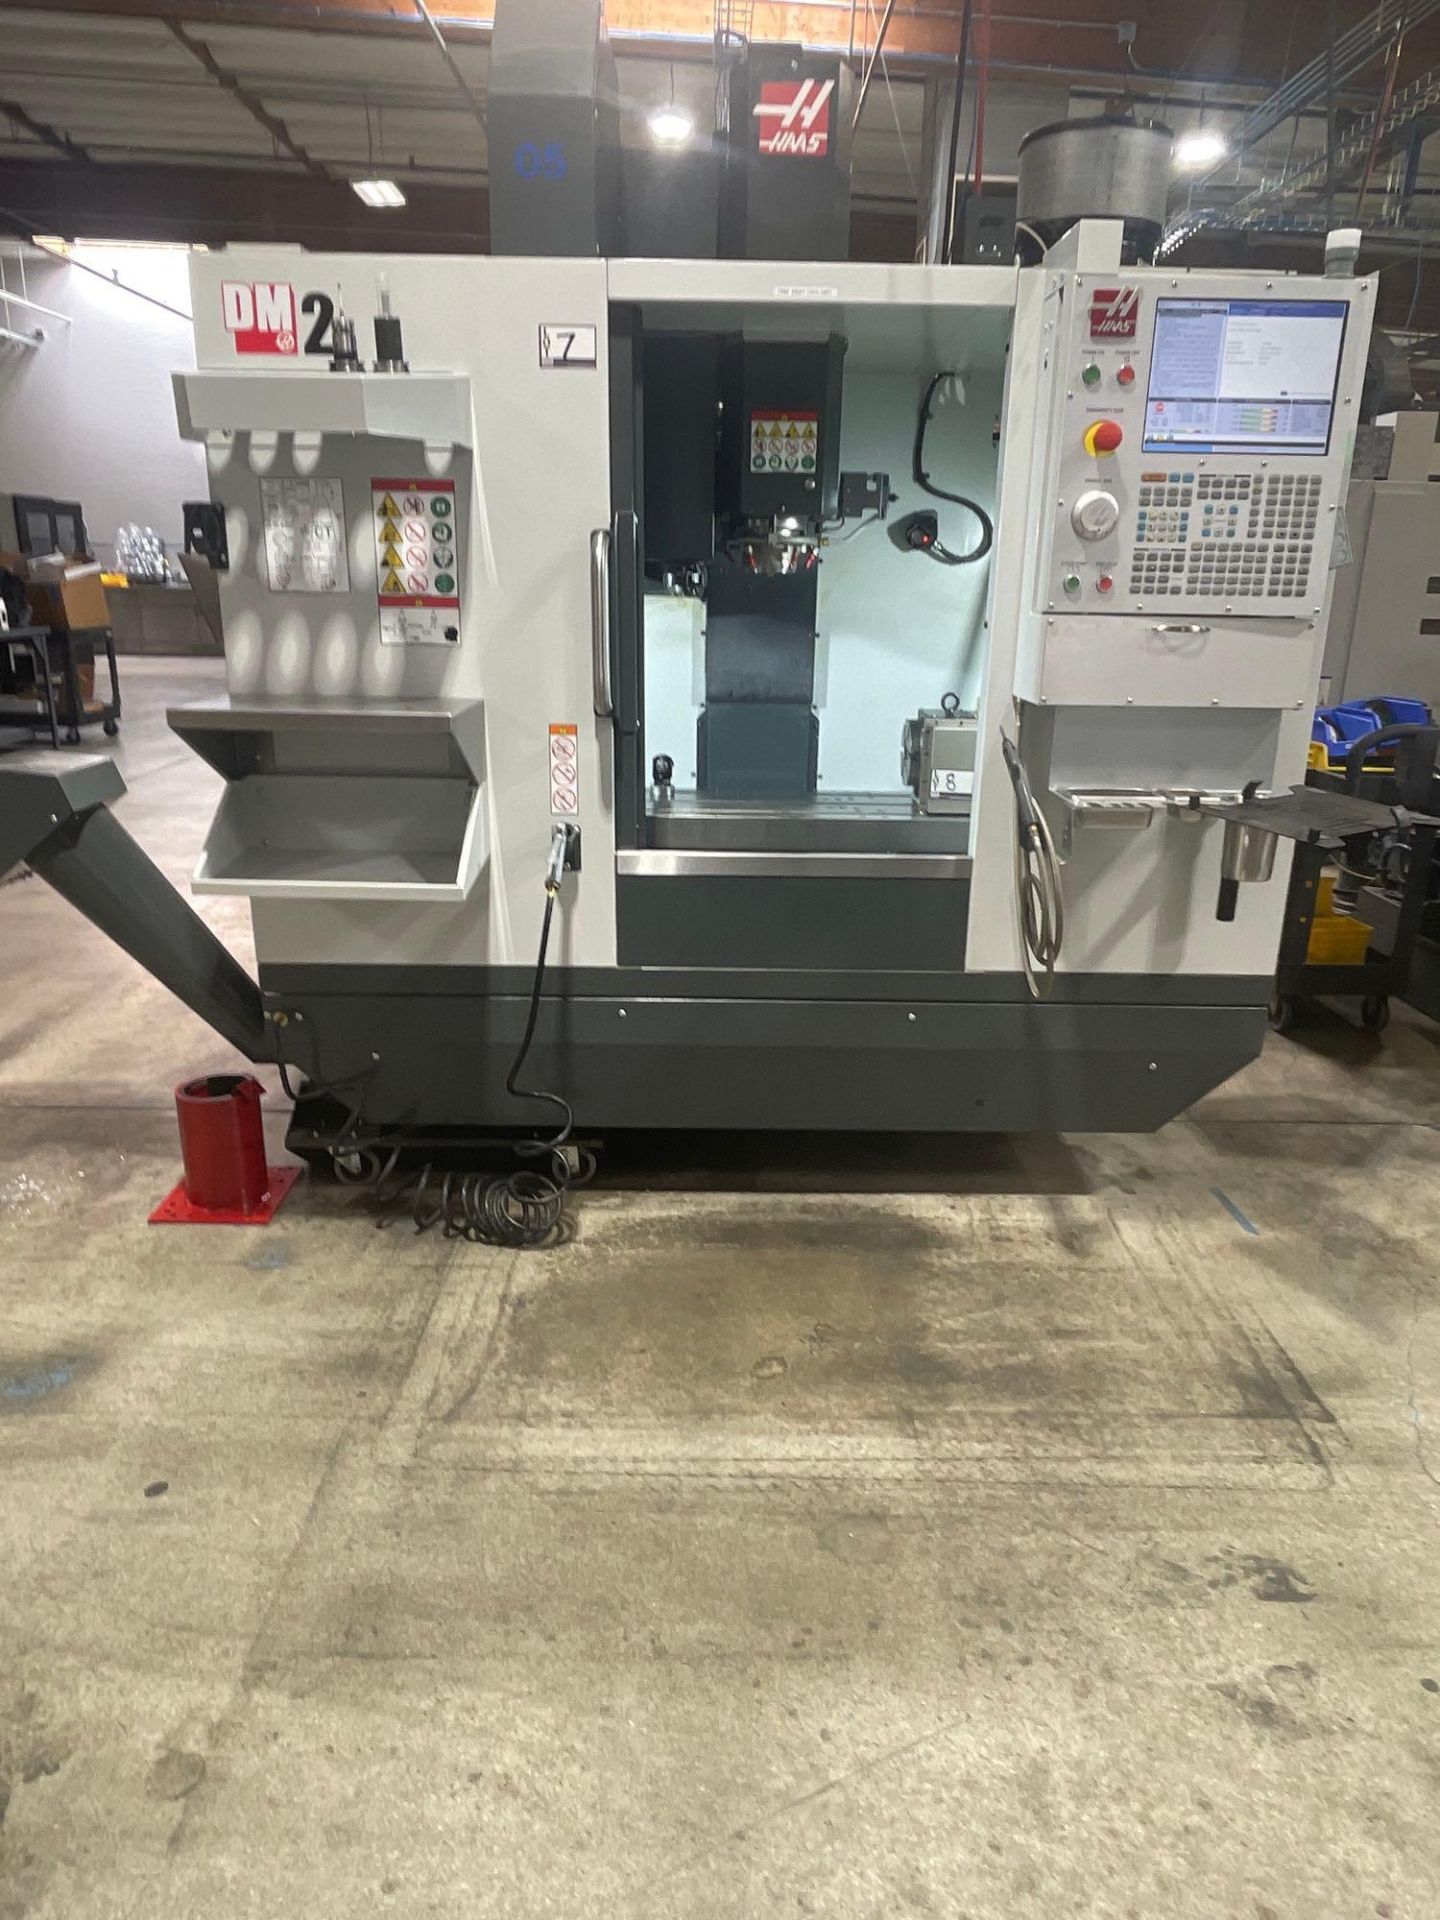 Haas DM-2, 28” x 16” x 15.5” Travels, CT 40, 18+1 SMTC, CTS, WIPS, as New as 2021 - Image 6 of 13